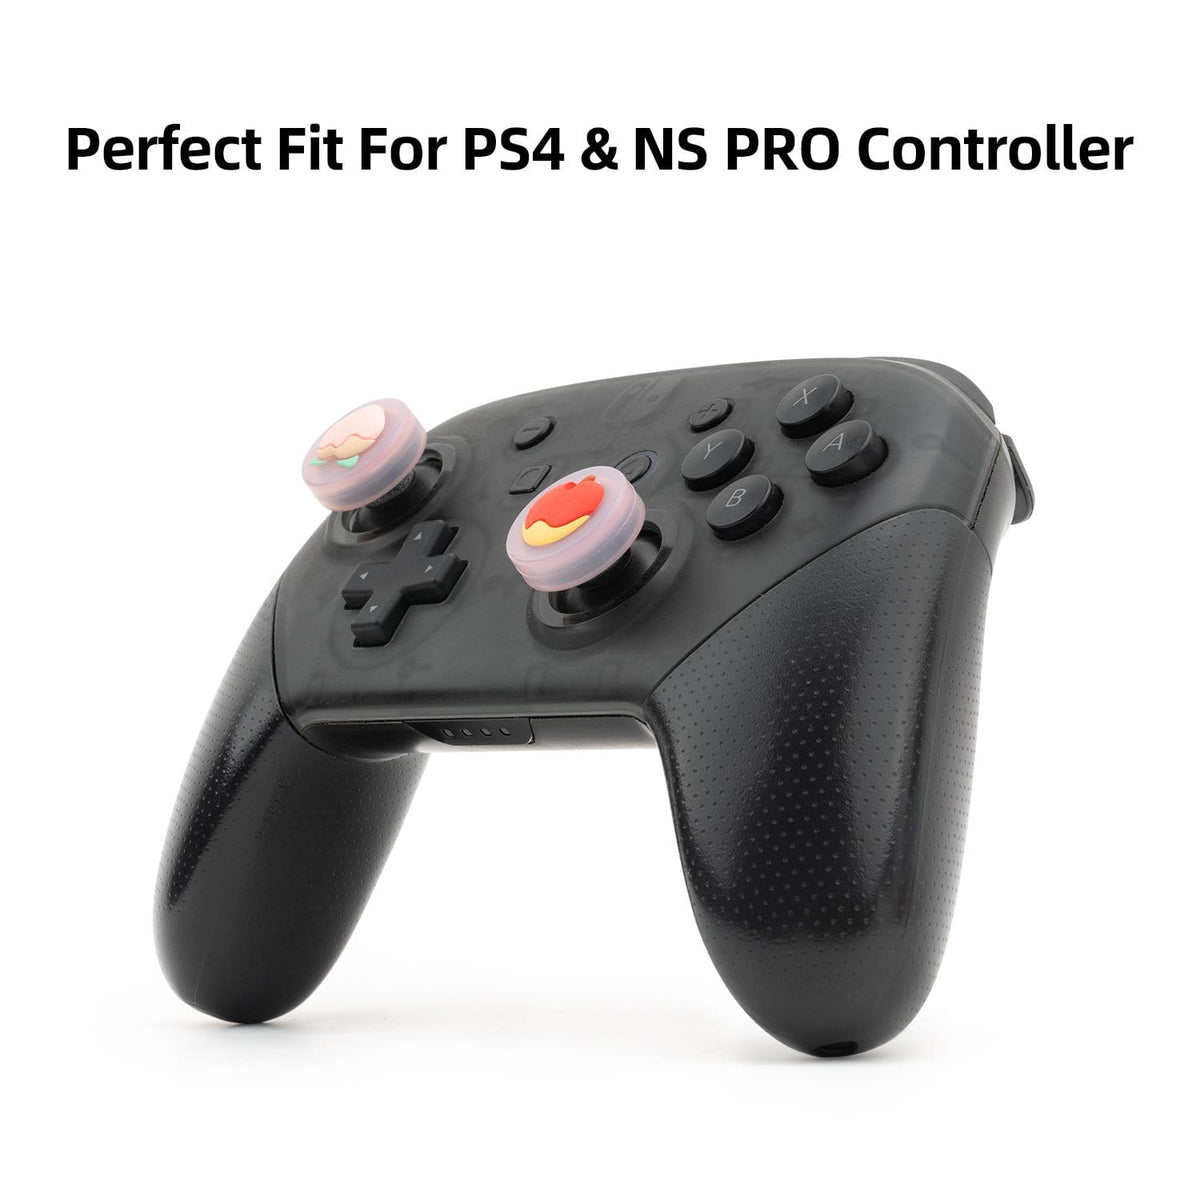 GeekShare Fruits Grip Caps for PS4/PS5 and Switch Pro- 2 Pair / Pcs - and